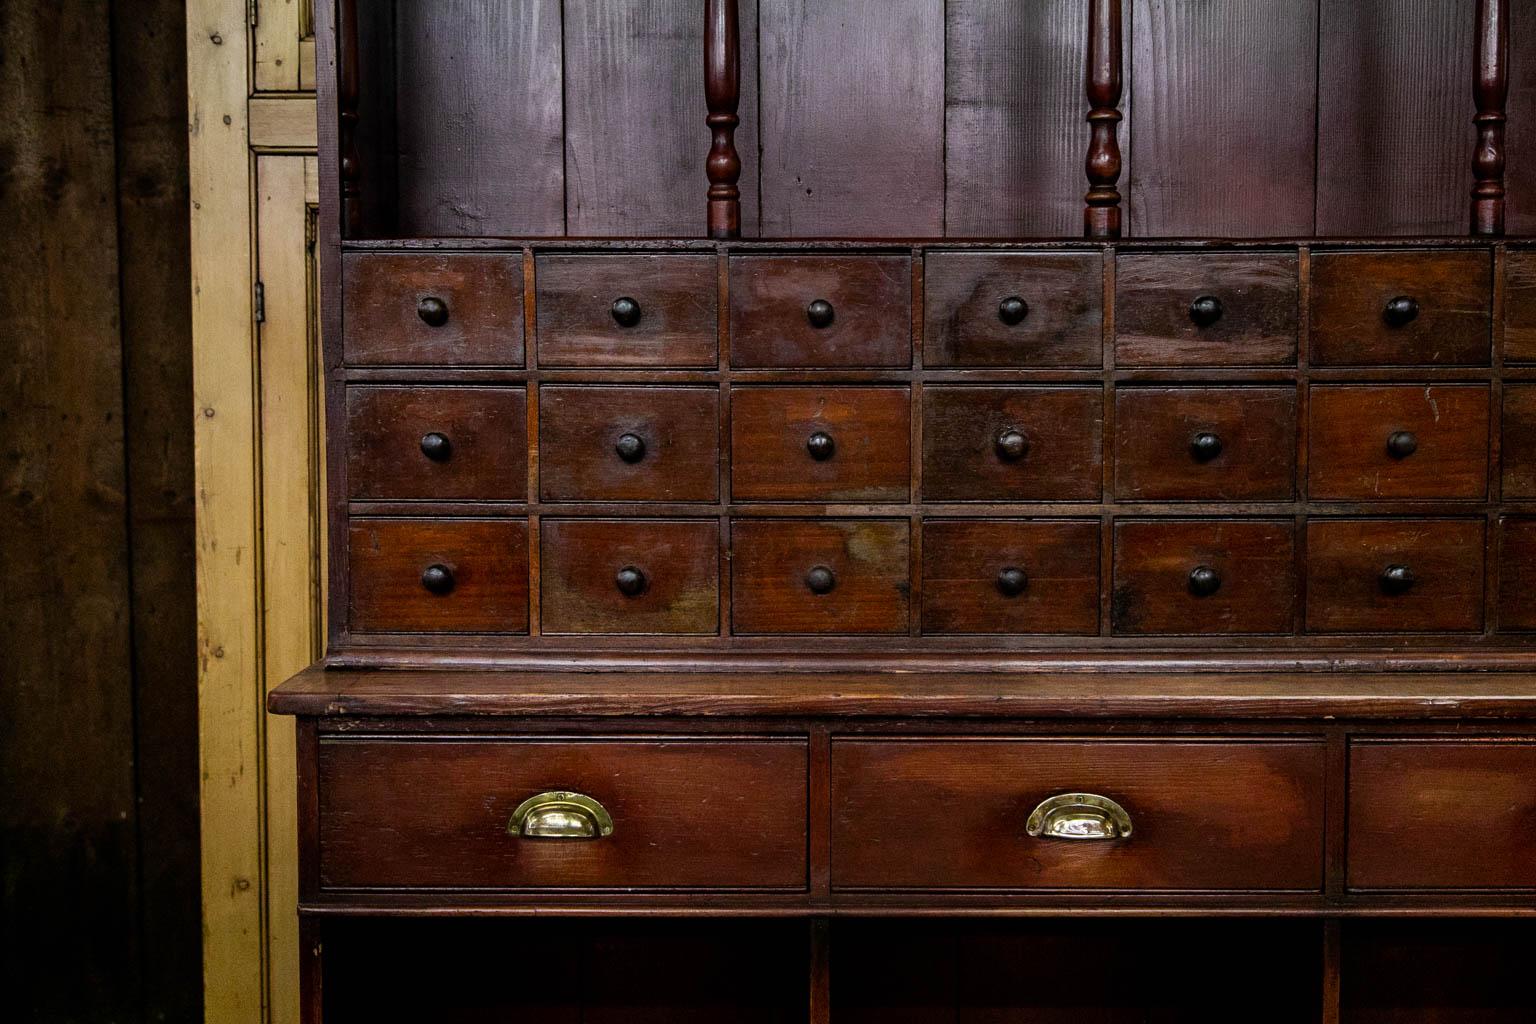 The top section of this apothecary cupboard has thirty apothecary drawers with the original wooden knobs. The top has eight support columns with matching pilasters on the sides. The drawers on the top and bottom both have incised cockbead. The